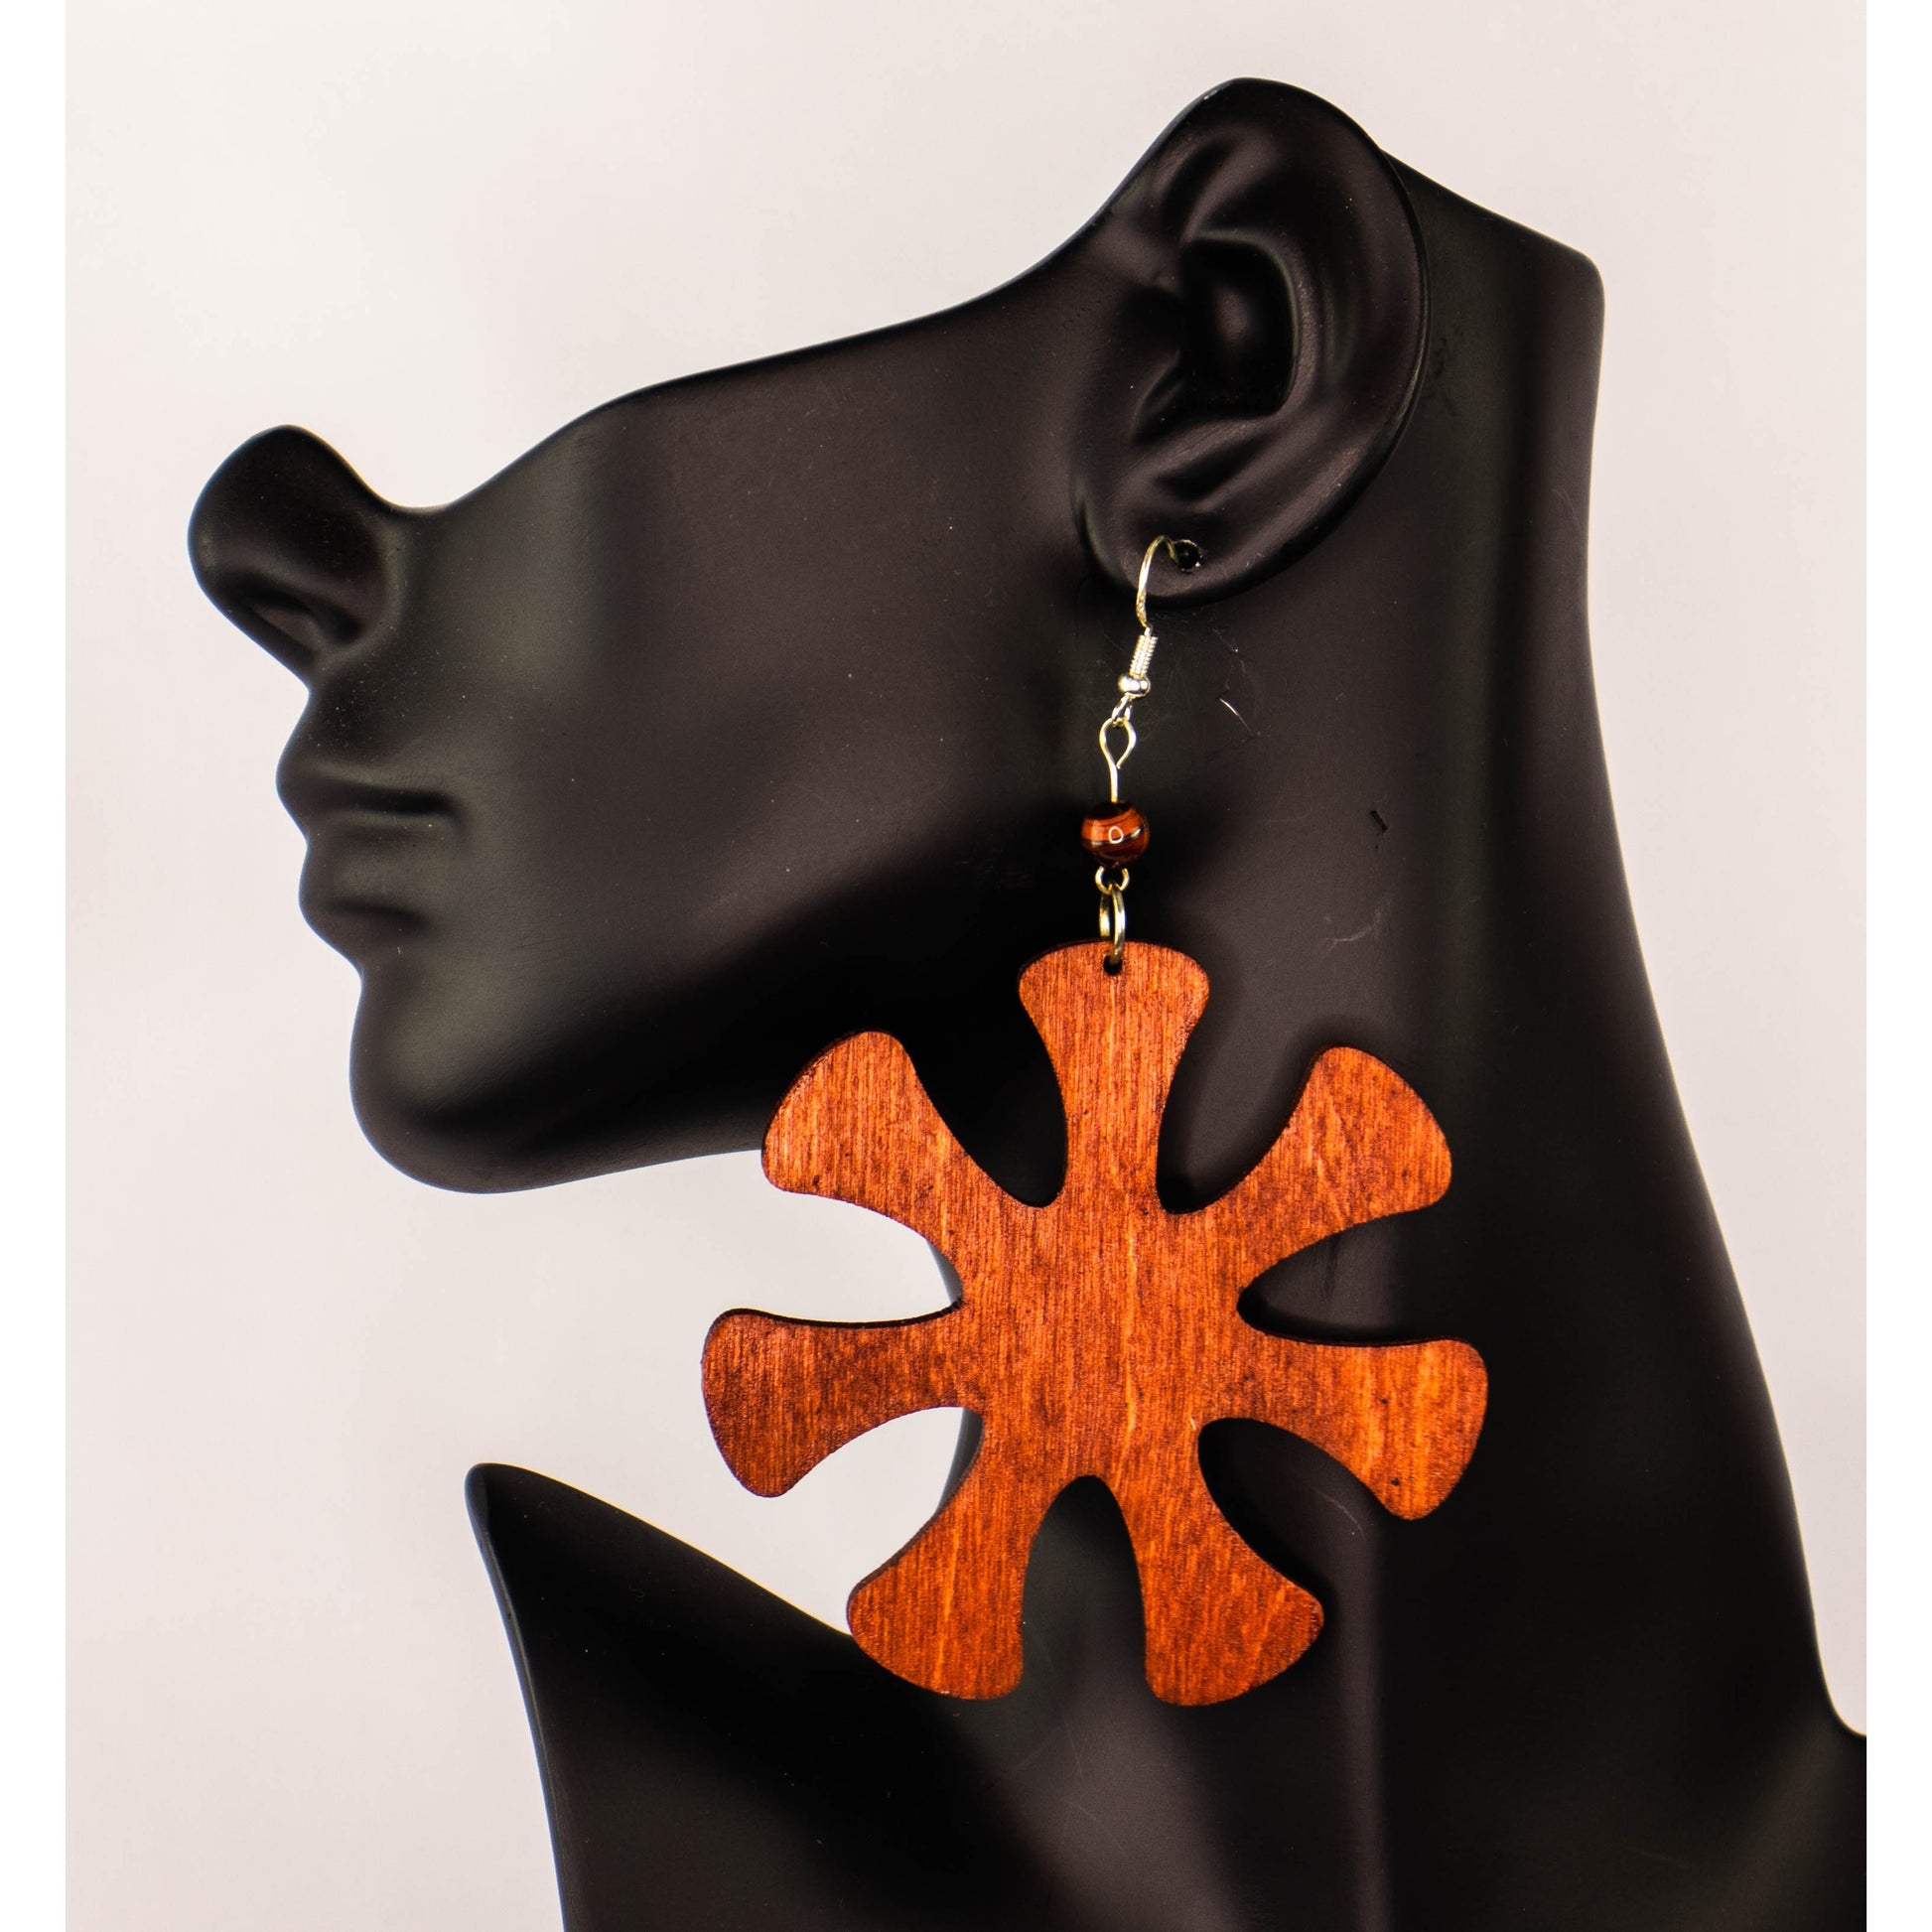 ANANSE NTONTAN/ Adinkra symbol/ Afrocentric/Affirmation/Bohemian/Cultural Conscious/Afro-Punk/West Africa Wood Earrings